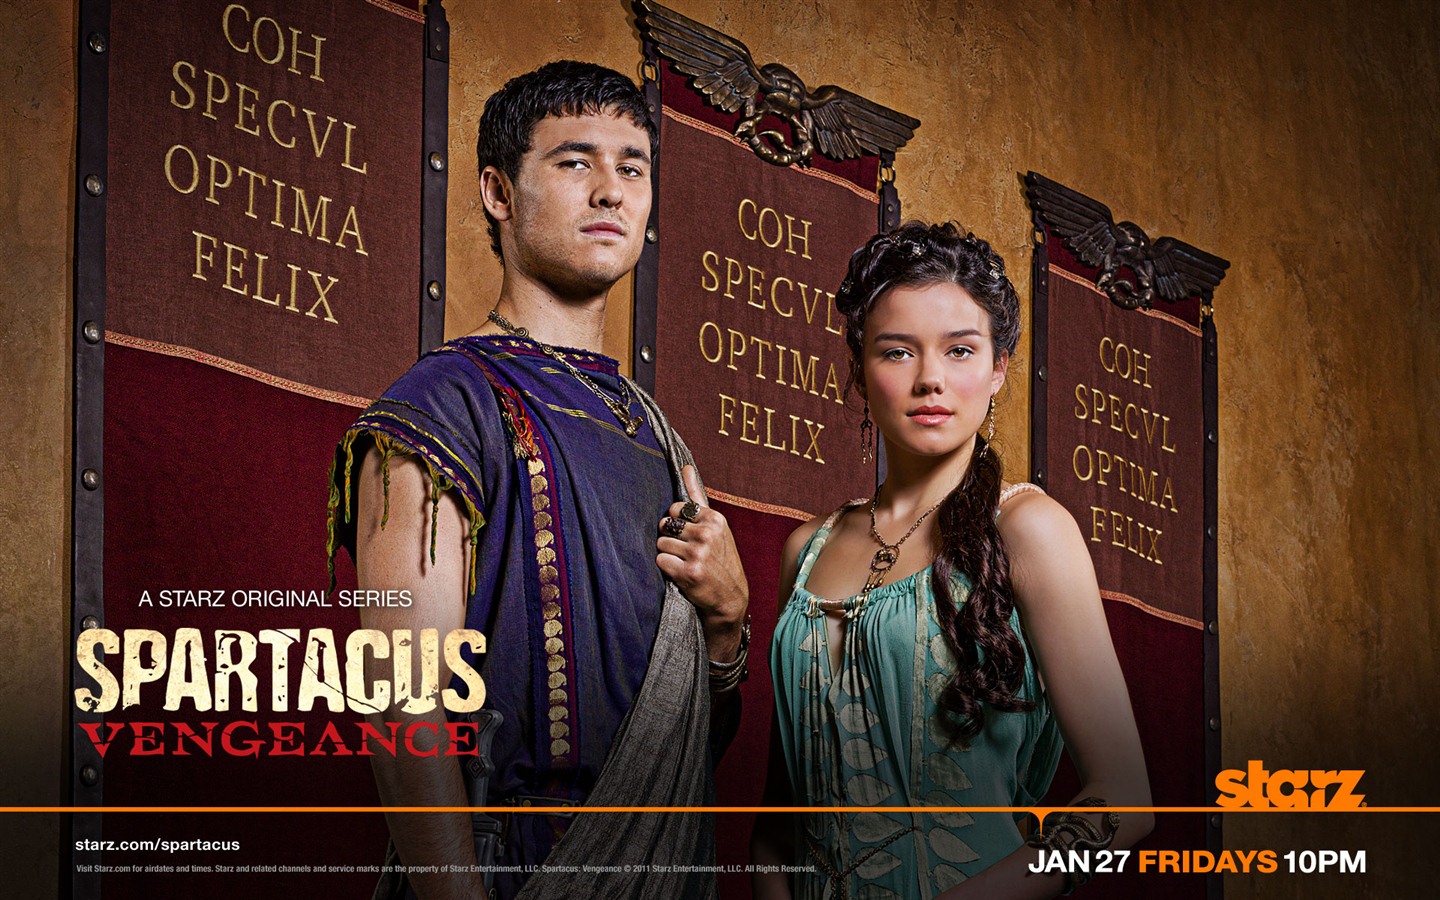 Spartacus: Vengeance HD wallpapers #6 - 1440x900